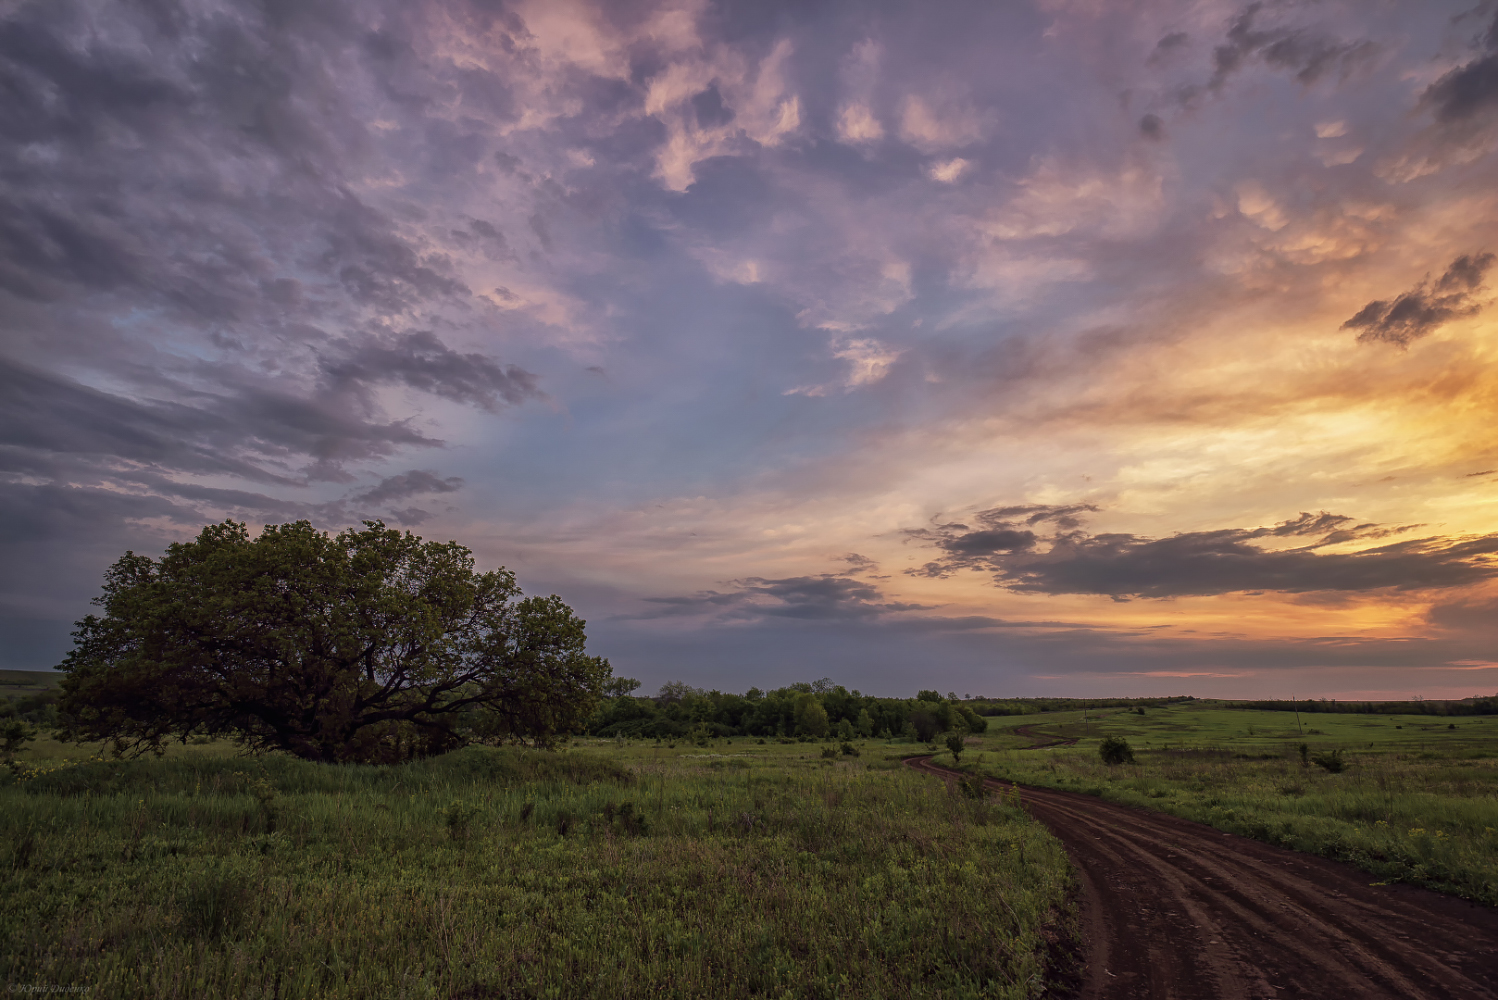 photo "***" tags: landscape, nature, clouds, grass, road, sunset, tree